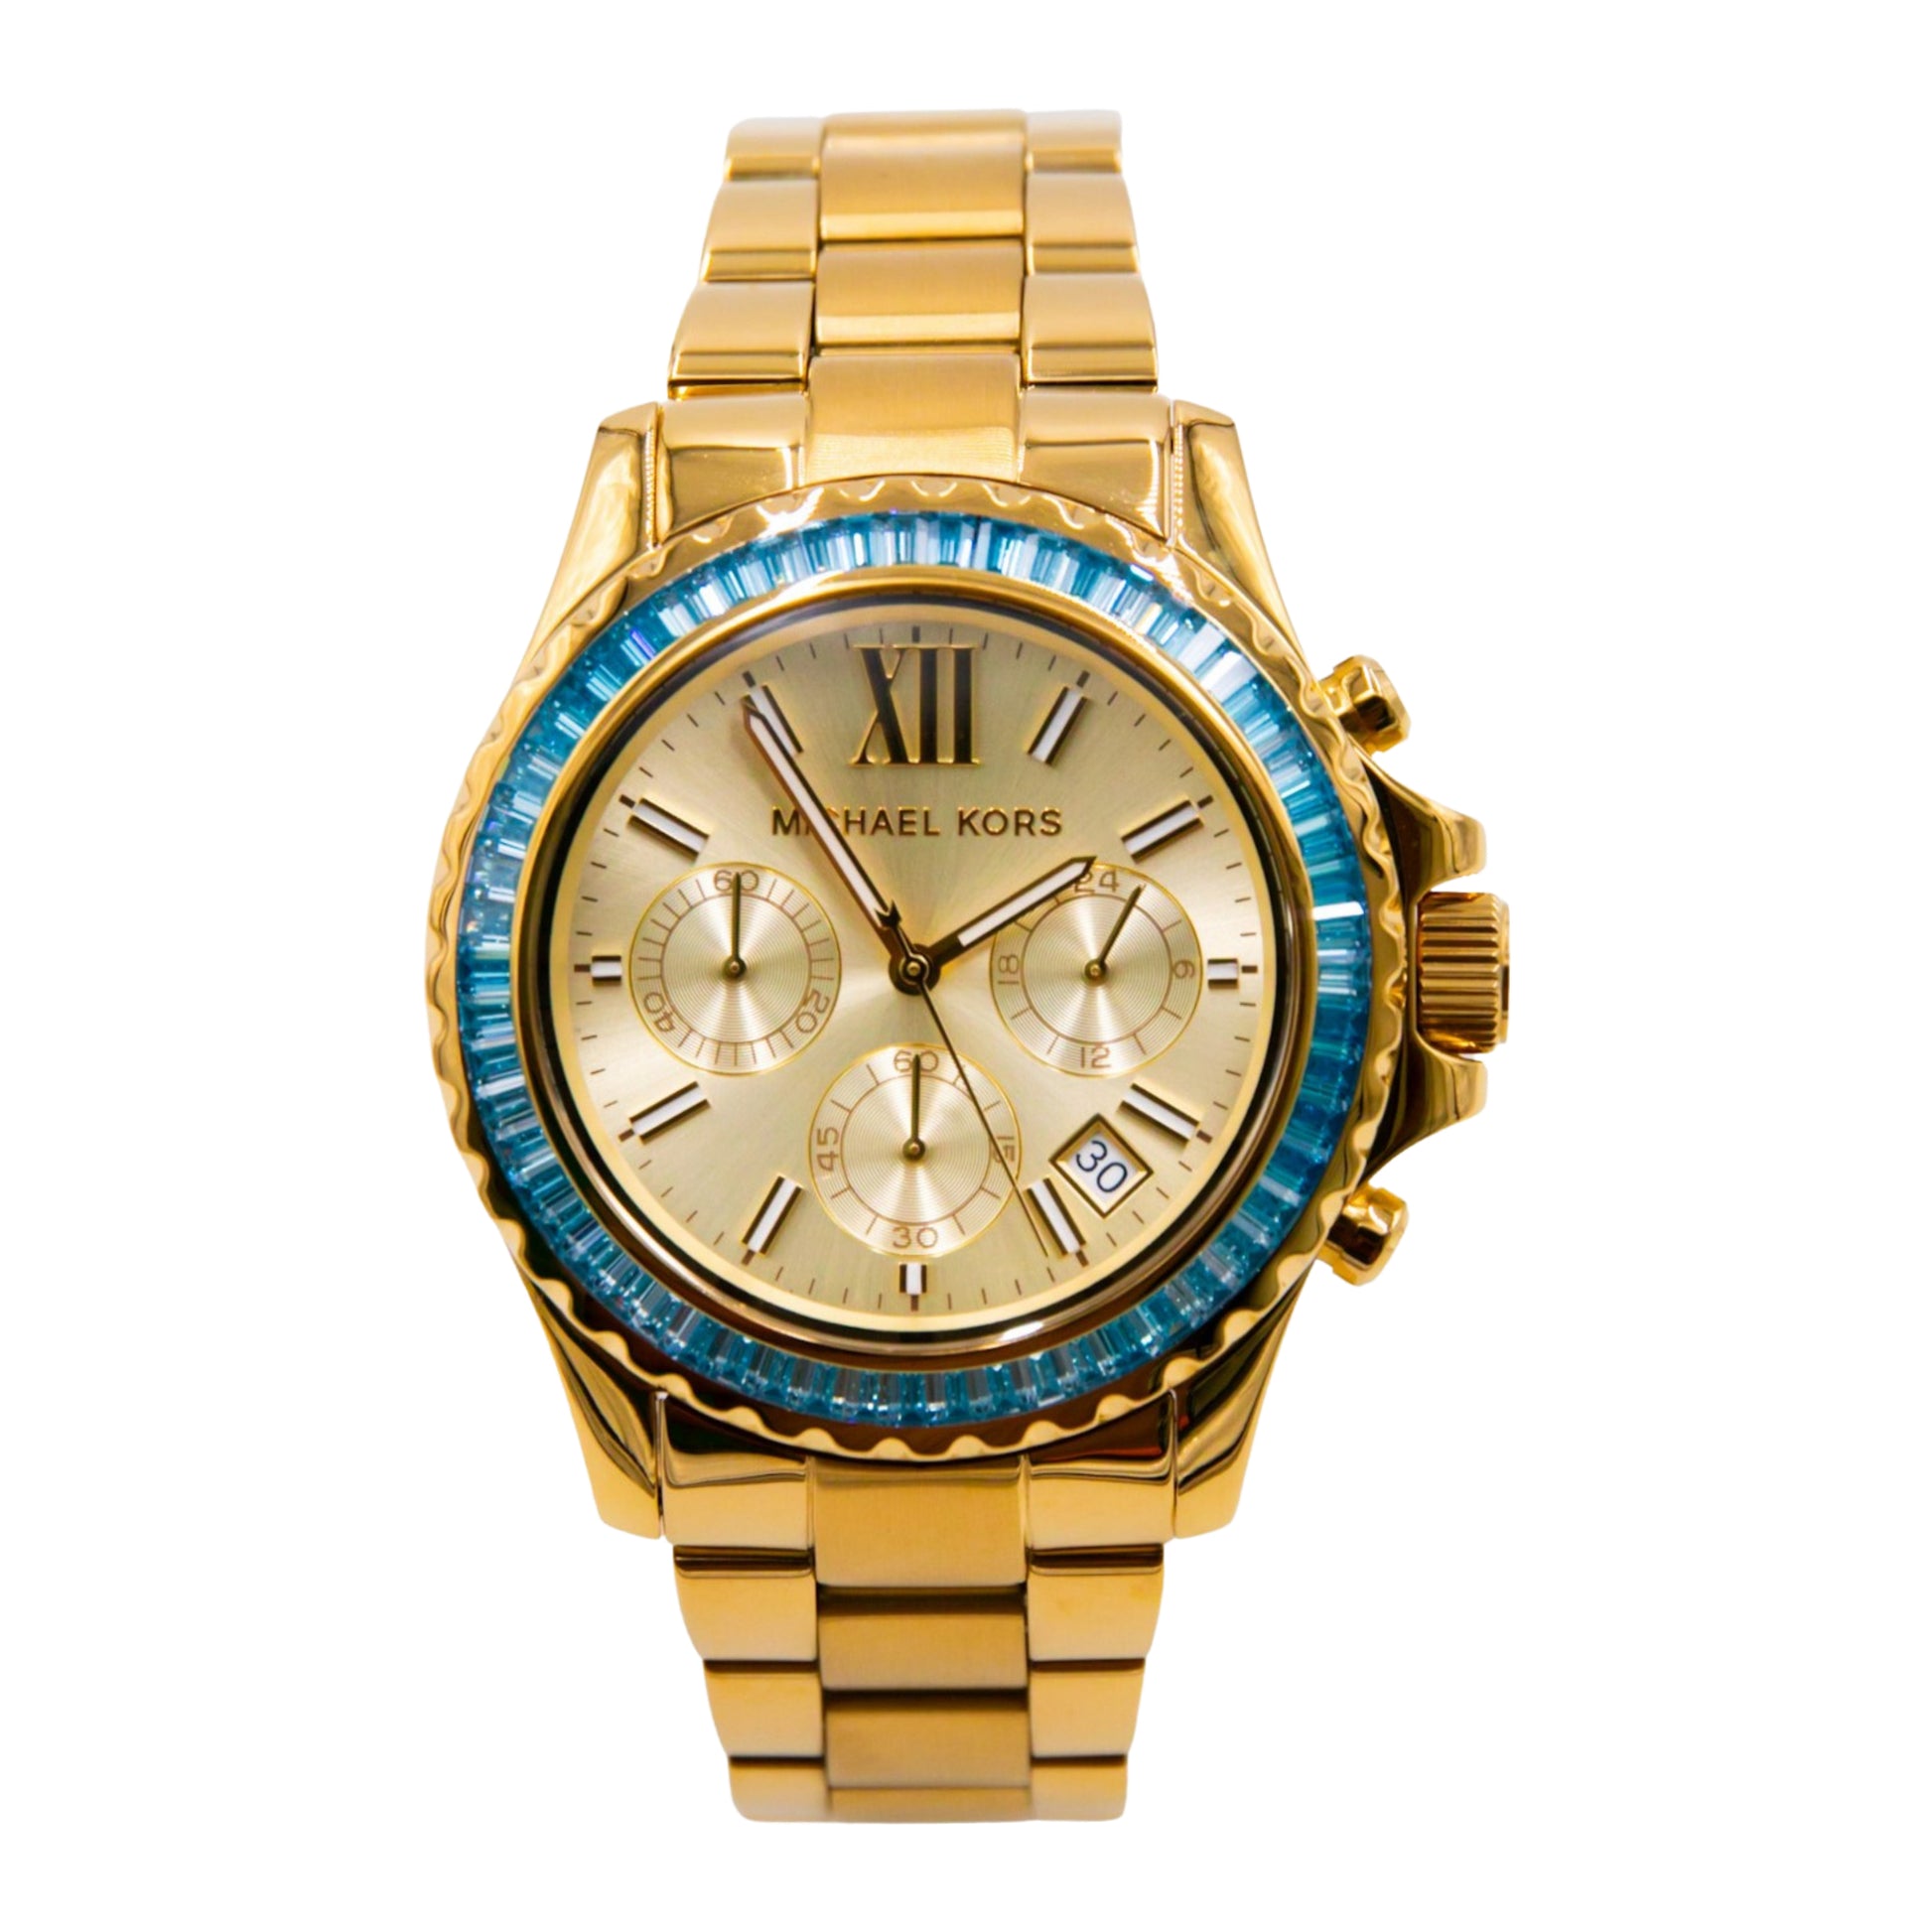 Michael Kors Everest Chronograph Gold-Tone Stainless Steel Watch - MK7210 - 796483562158